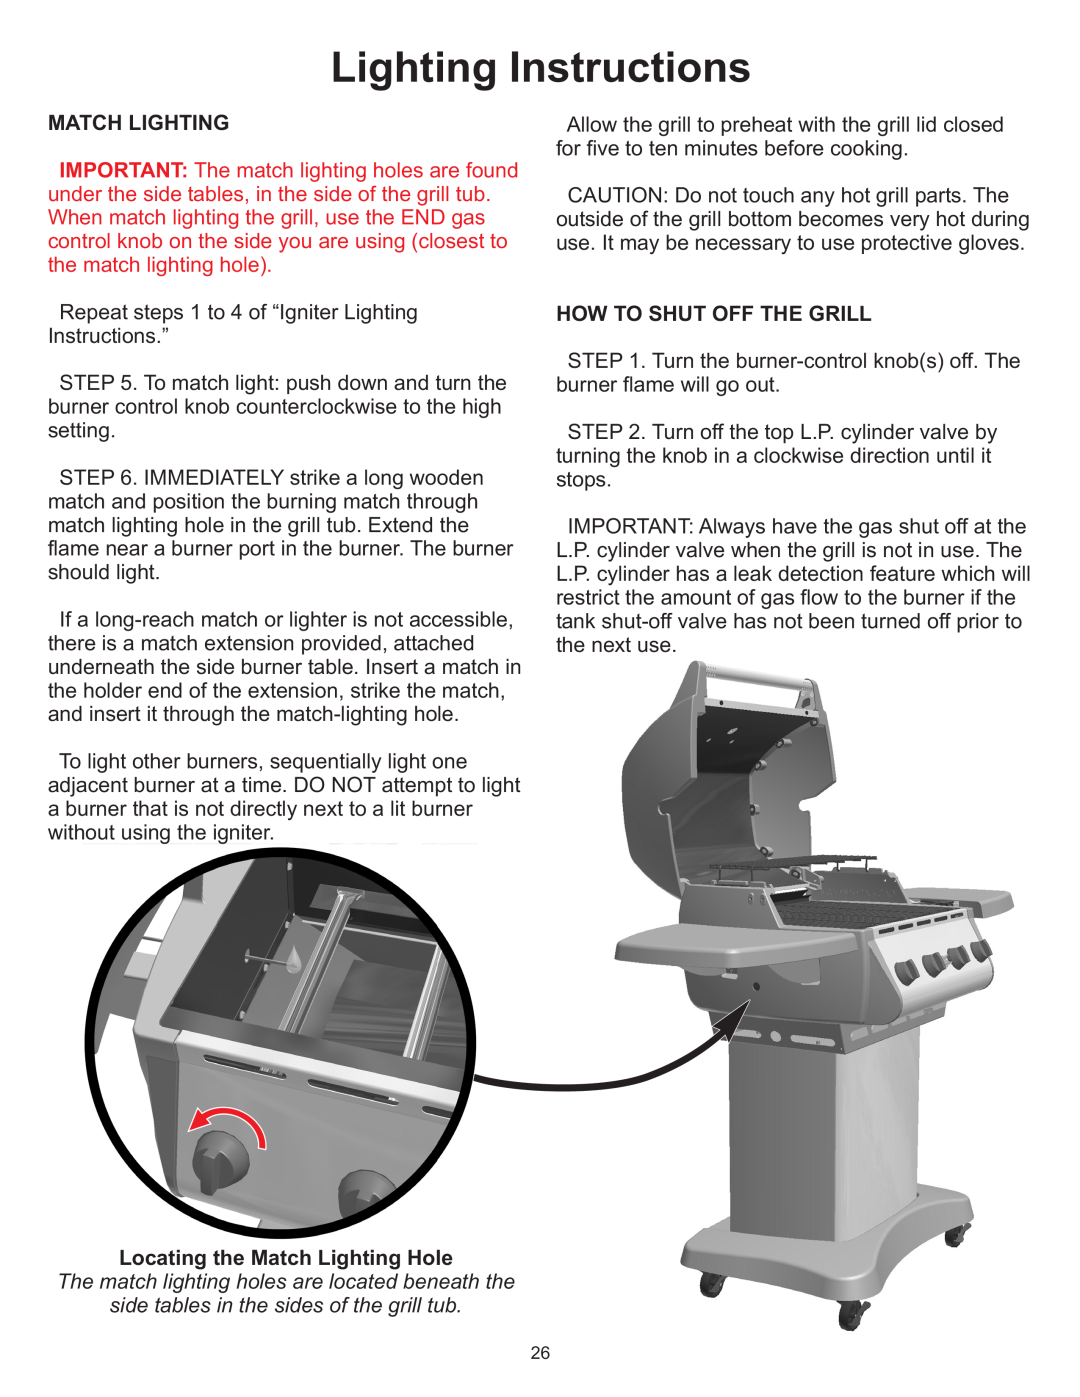 Vermont Casting Gas Grill owner manual Lighting Instructions, Match Lighting, How To Shut Off The Grill 